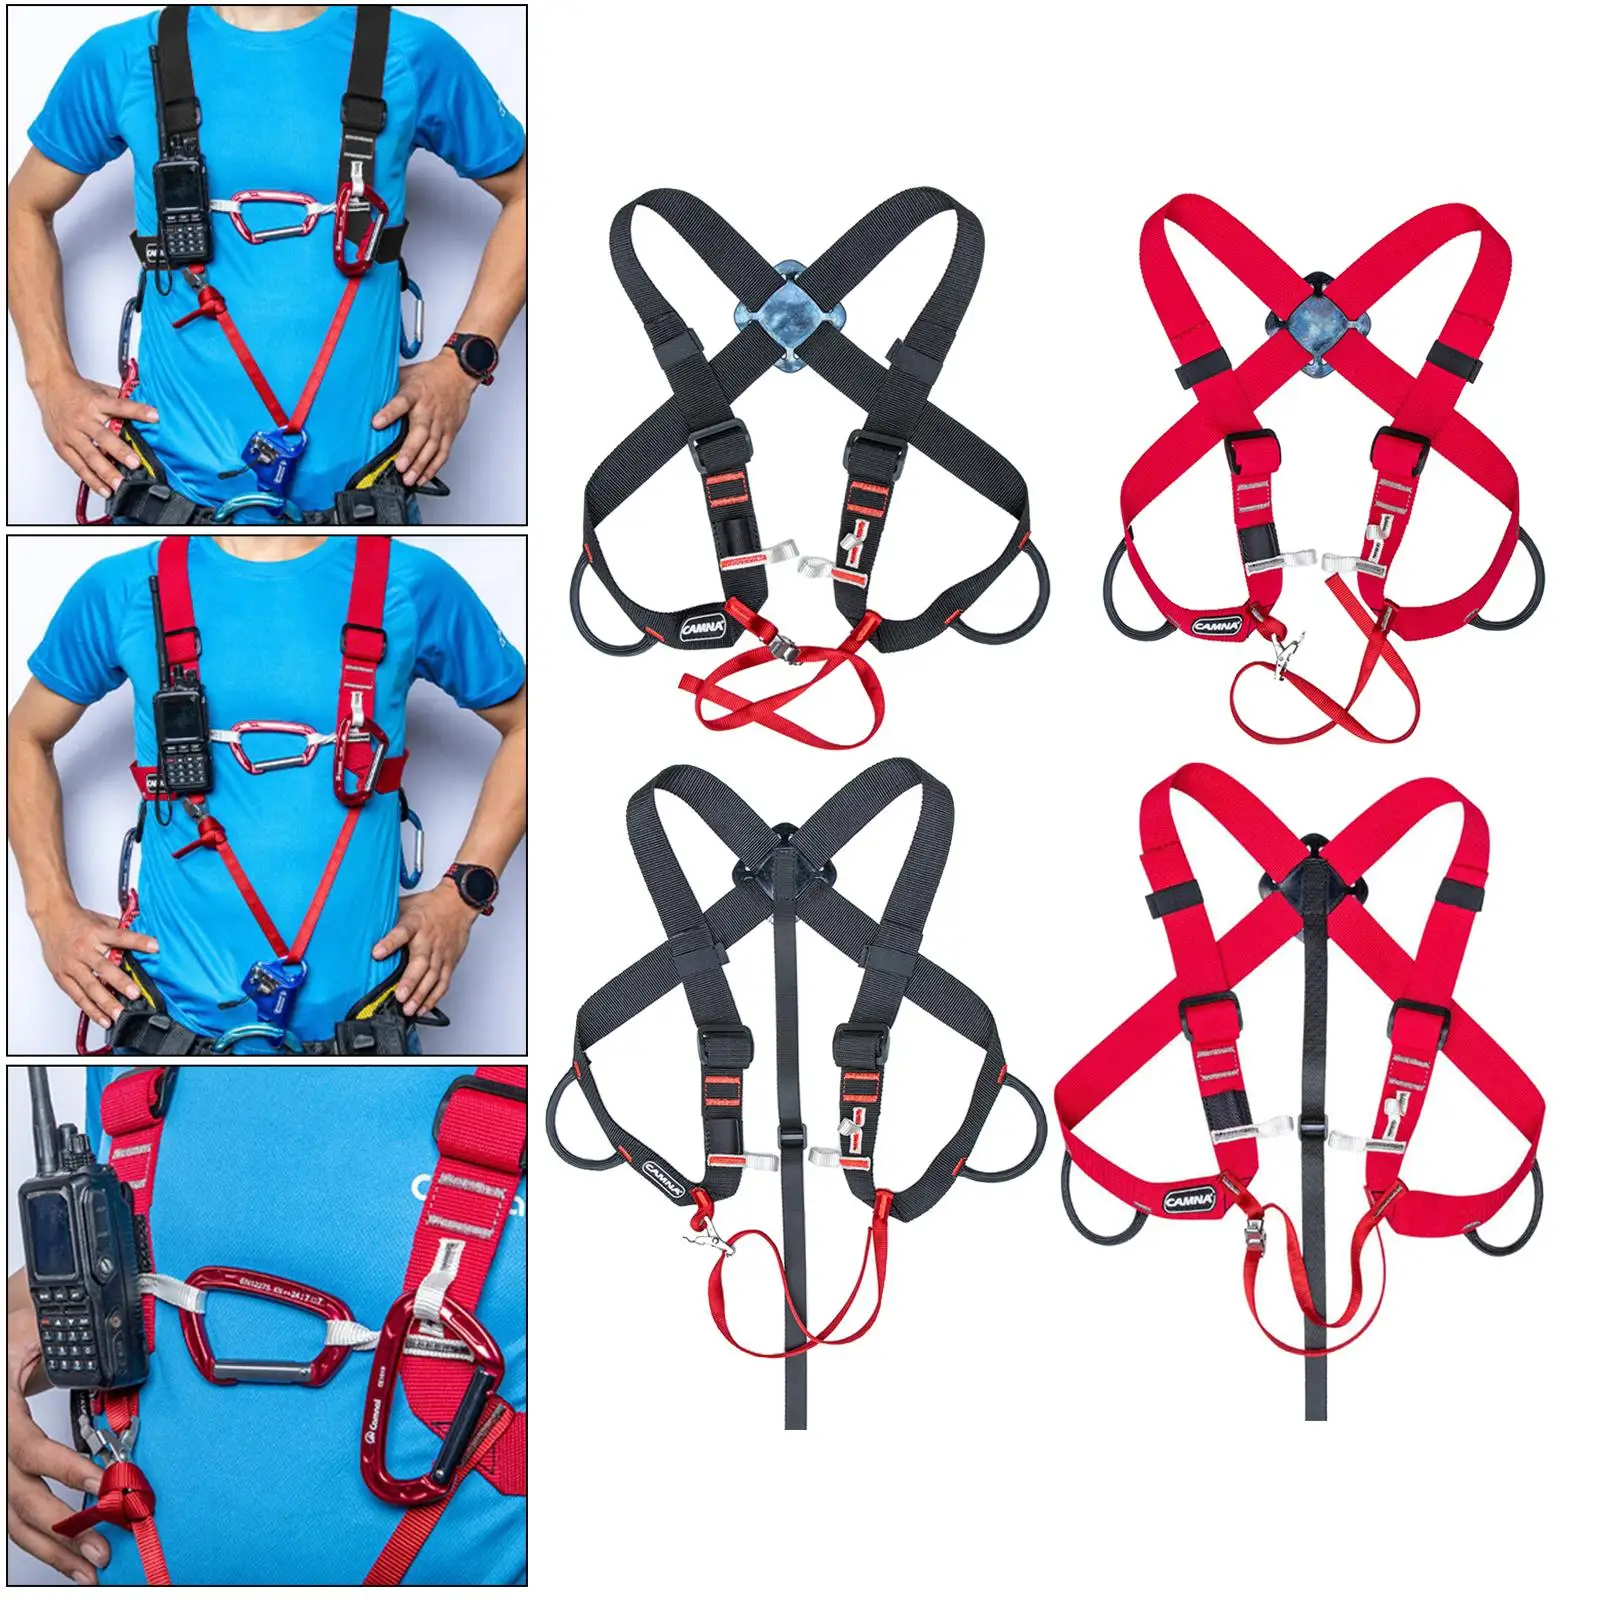 Upper Body Safety Harness Ascending Protection Adjustable Fixed Belt Caving Canyoning Rock Climb